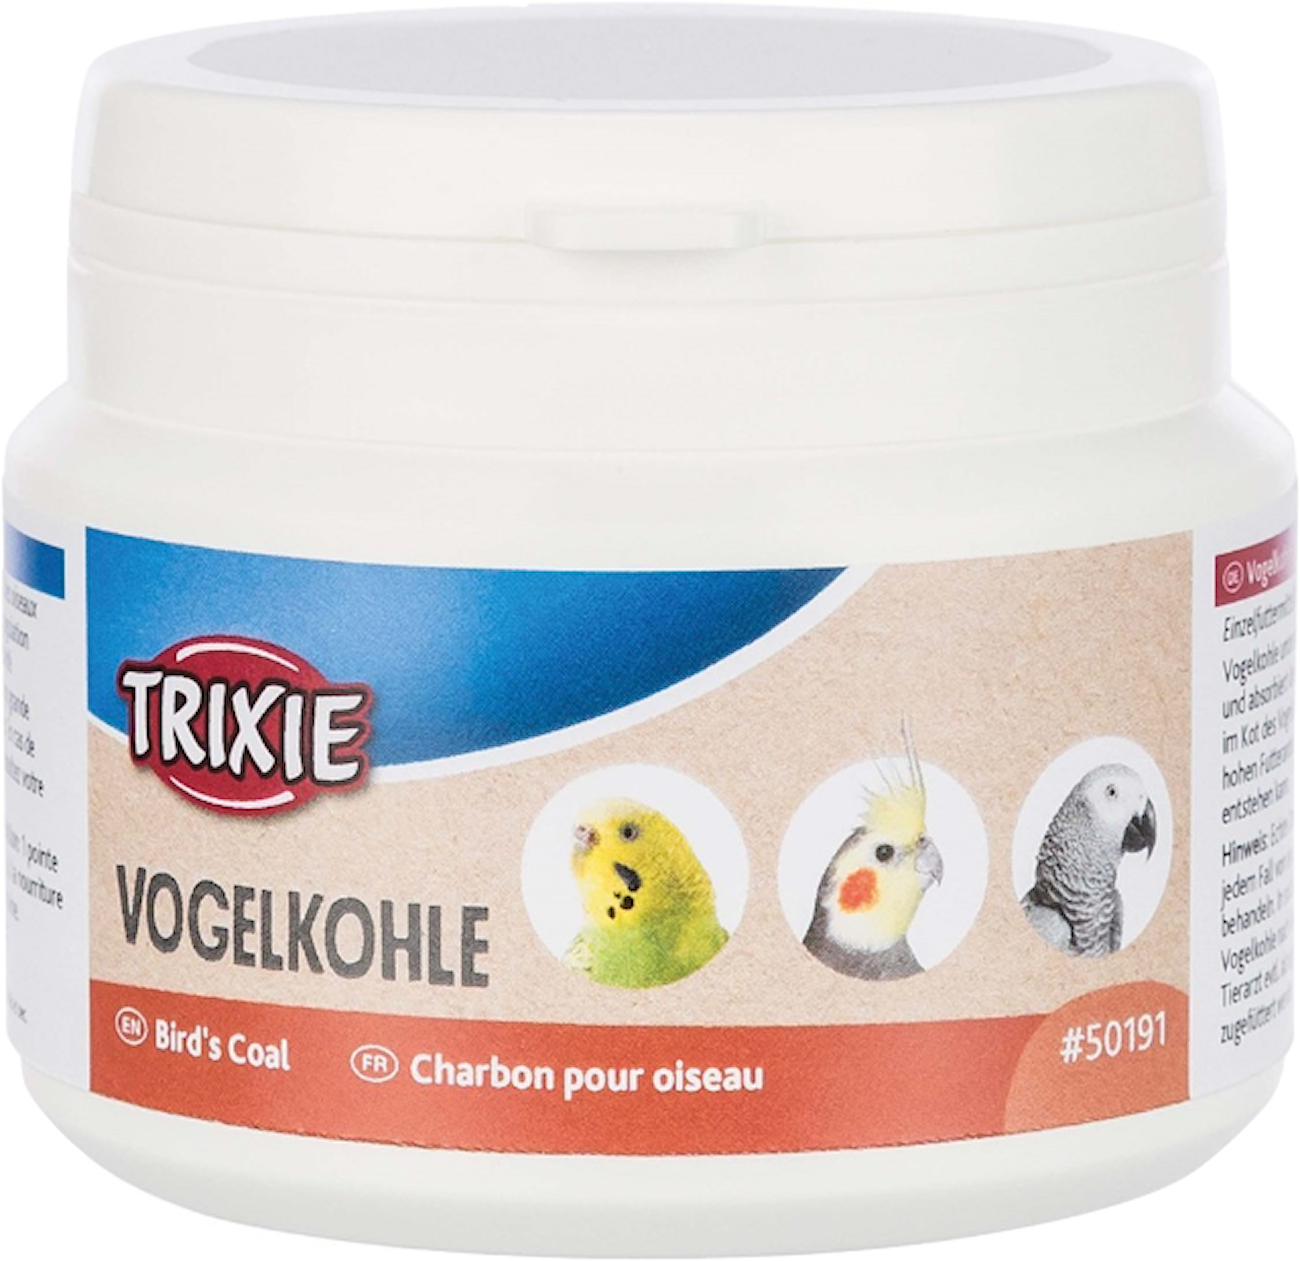 Trixie Bird Coal White 30 g Förpackning.png